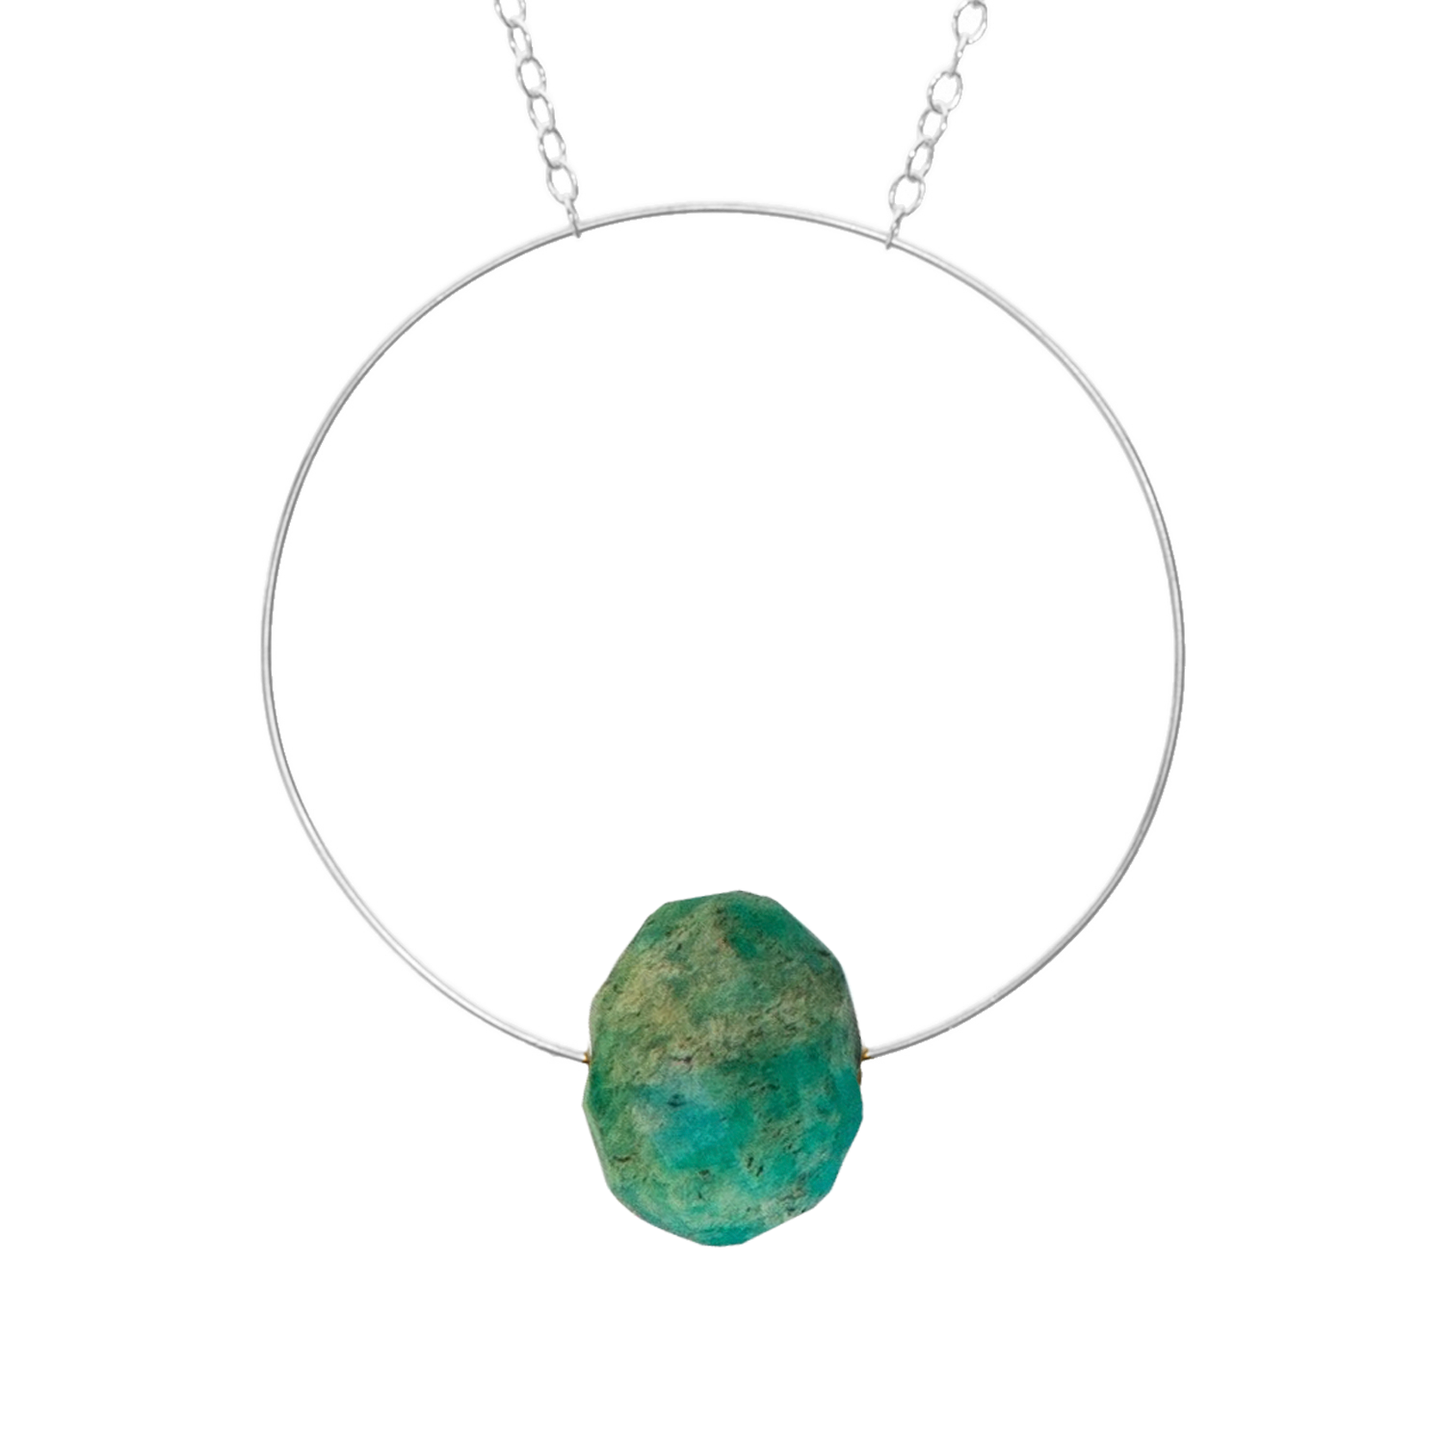 Circle Pendant Necklace with hand-cut Gemstones